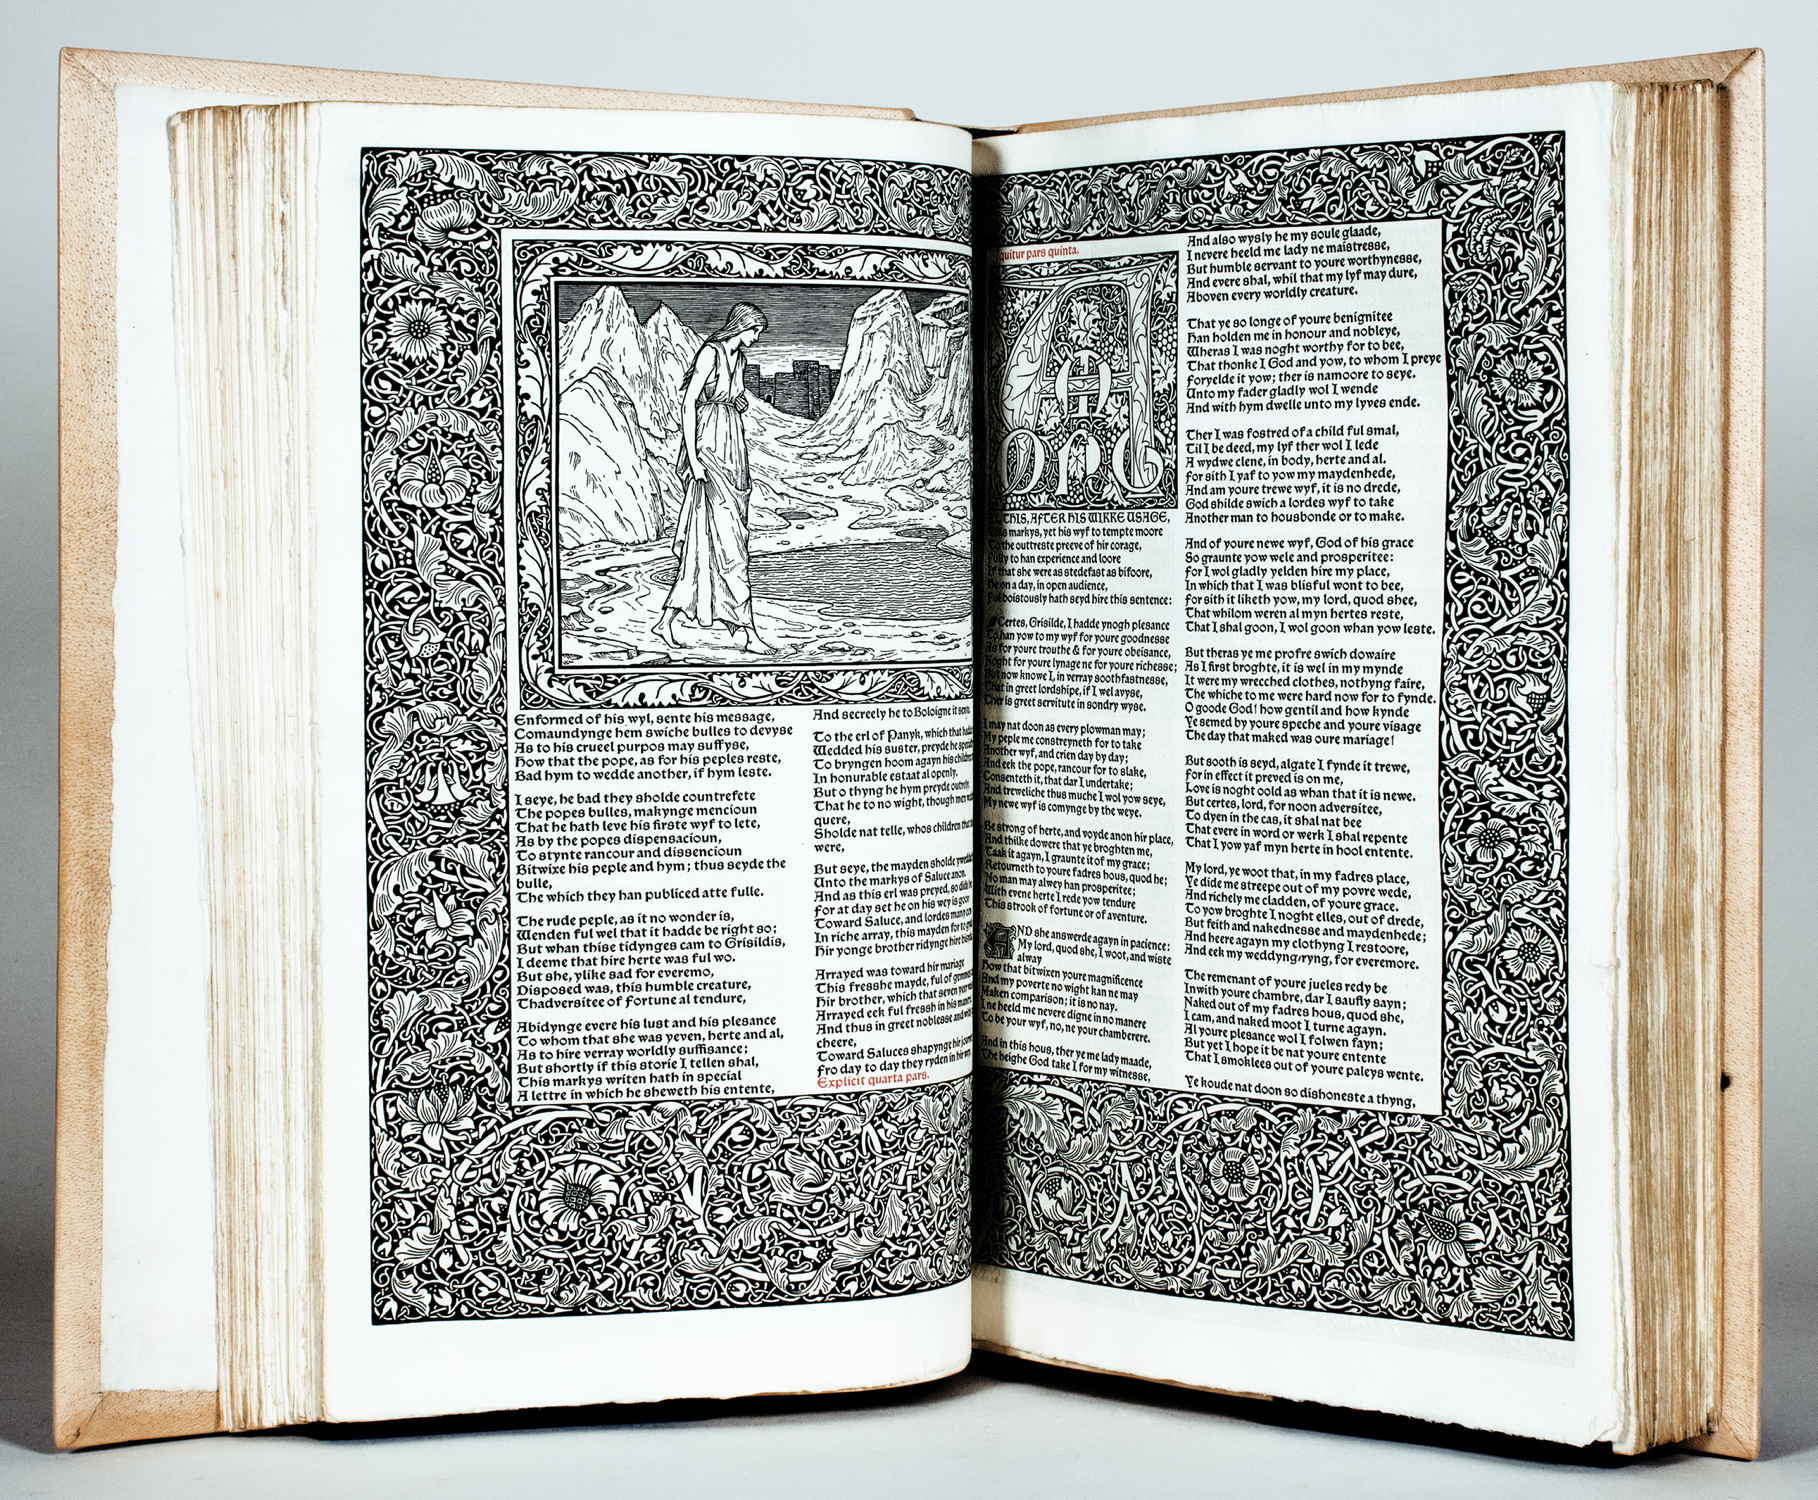 Kelmscott - Chaucer. The Works. 1896 - Image 3 of 7